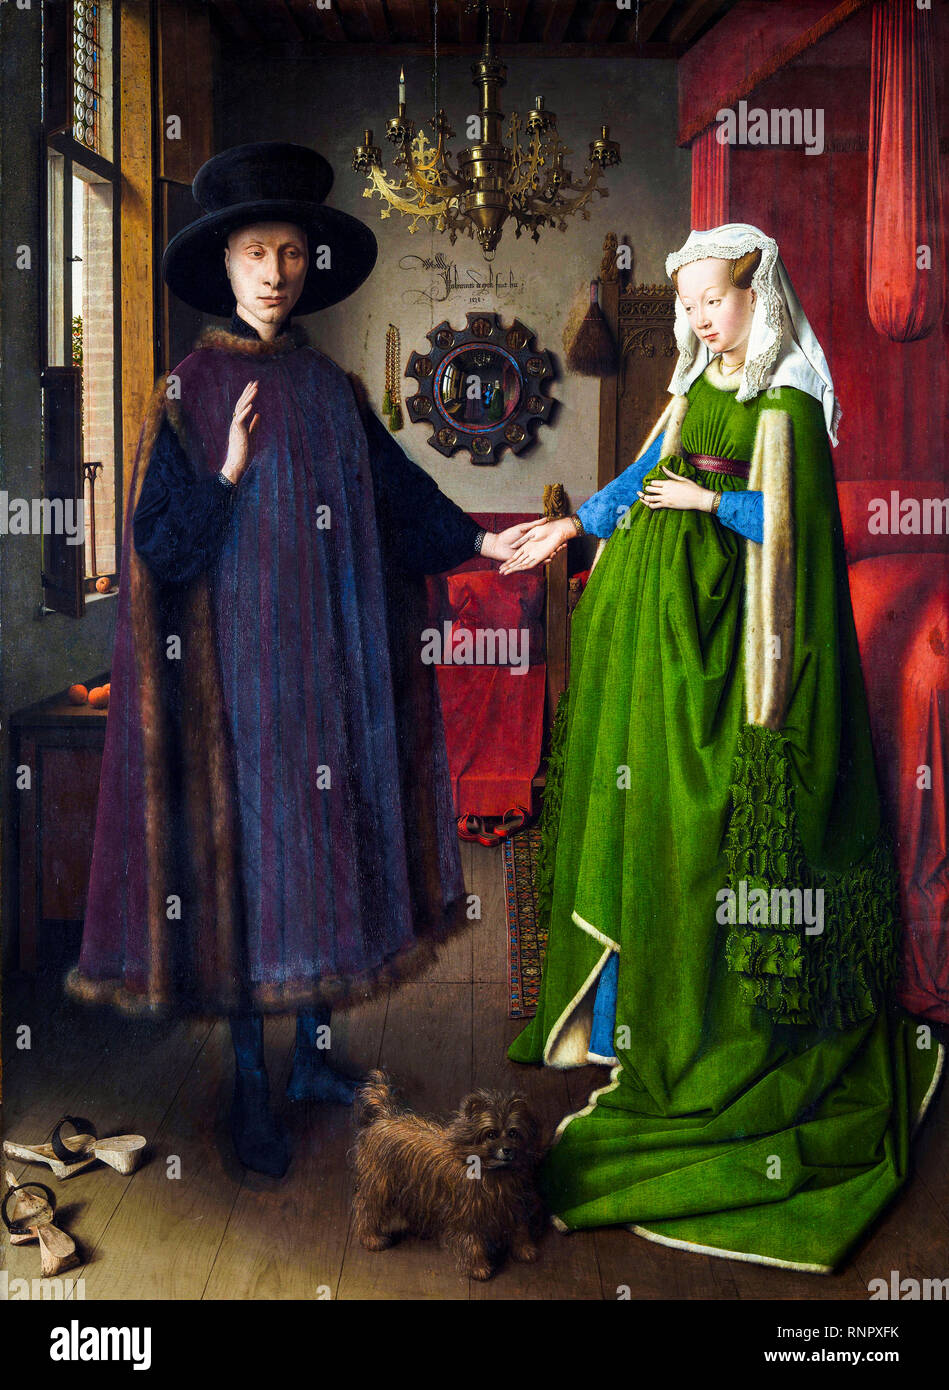 The Arnolfini Portrait or Portrait of Giovanni Arnolfini and his Wife by Flemish artist Jan Van Eyck, painting in oil on oak panel, 1434 Stock Photo